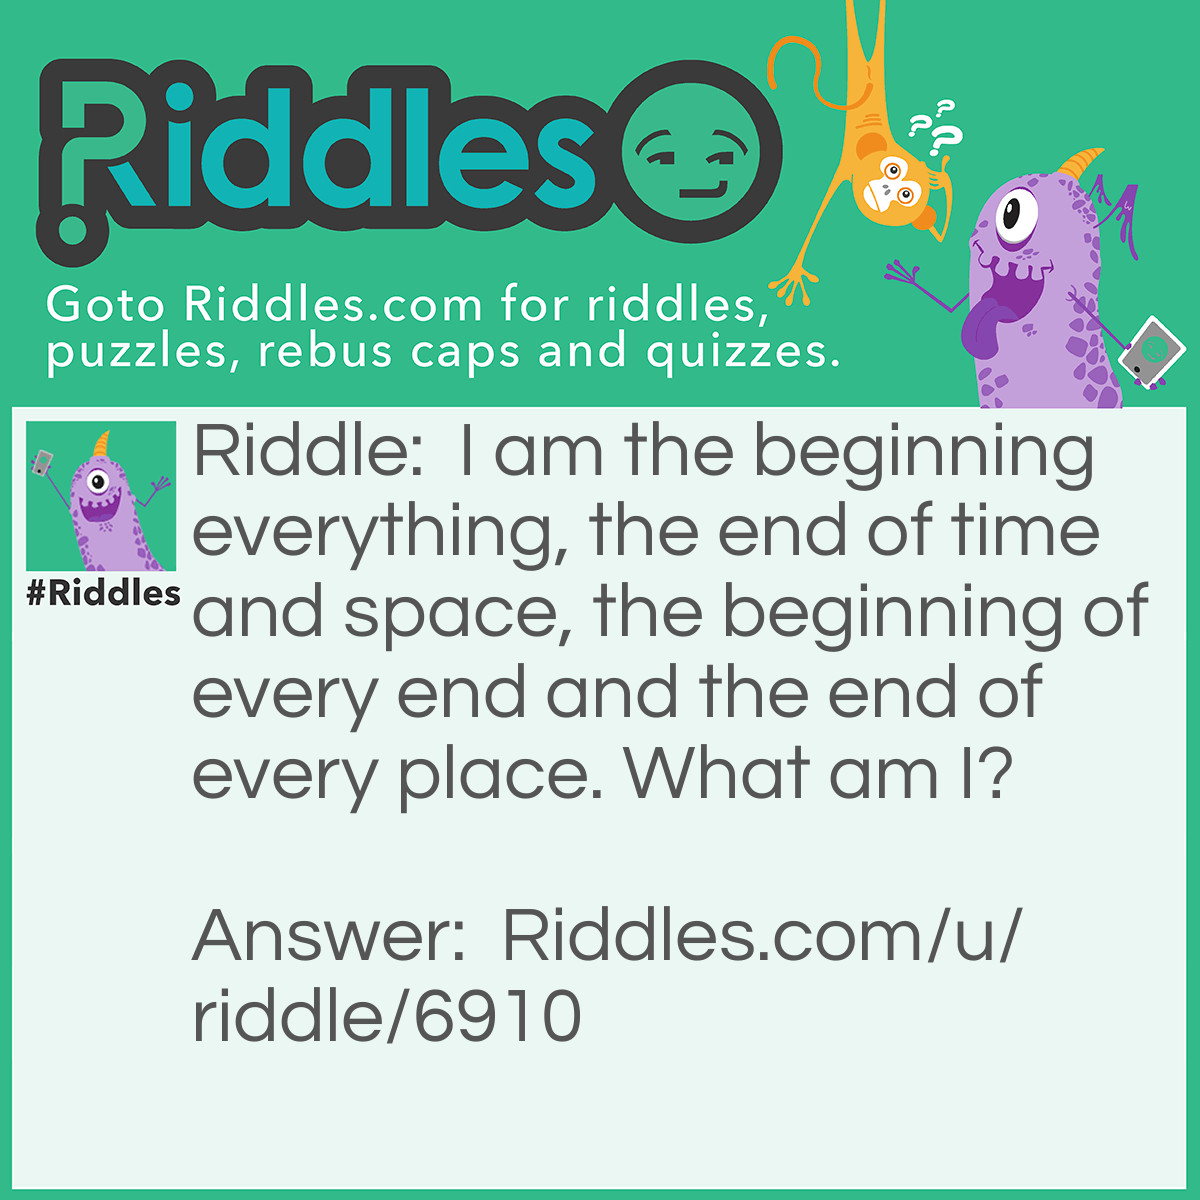 Riddle: I am the beginning everything, the end of time and space, the beginning of every end and the end of every place. What am I? Answer: E.